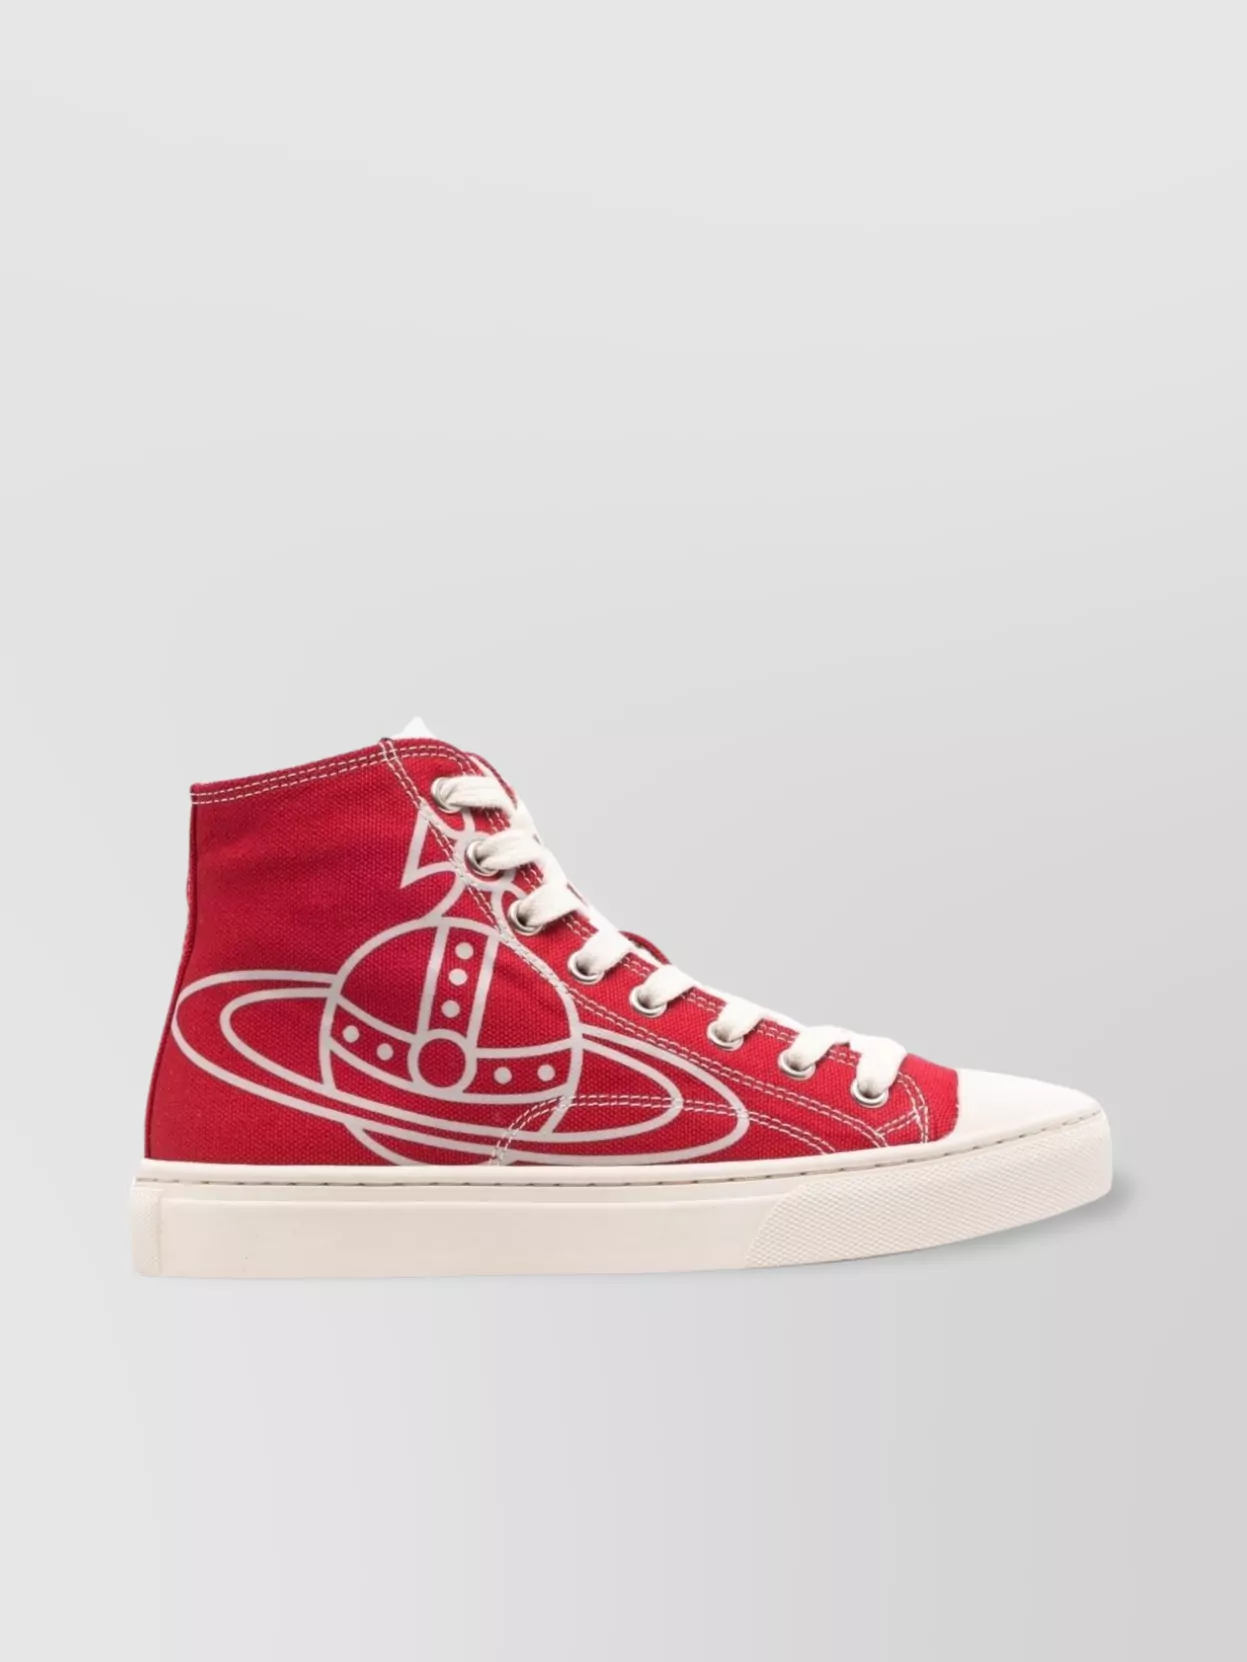 Shop Vivienne Westwood Canvas High-top Sneakers Featuring Contrast Stitching In Burgundy